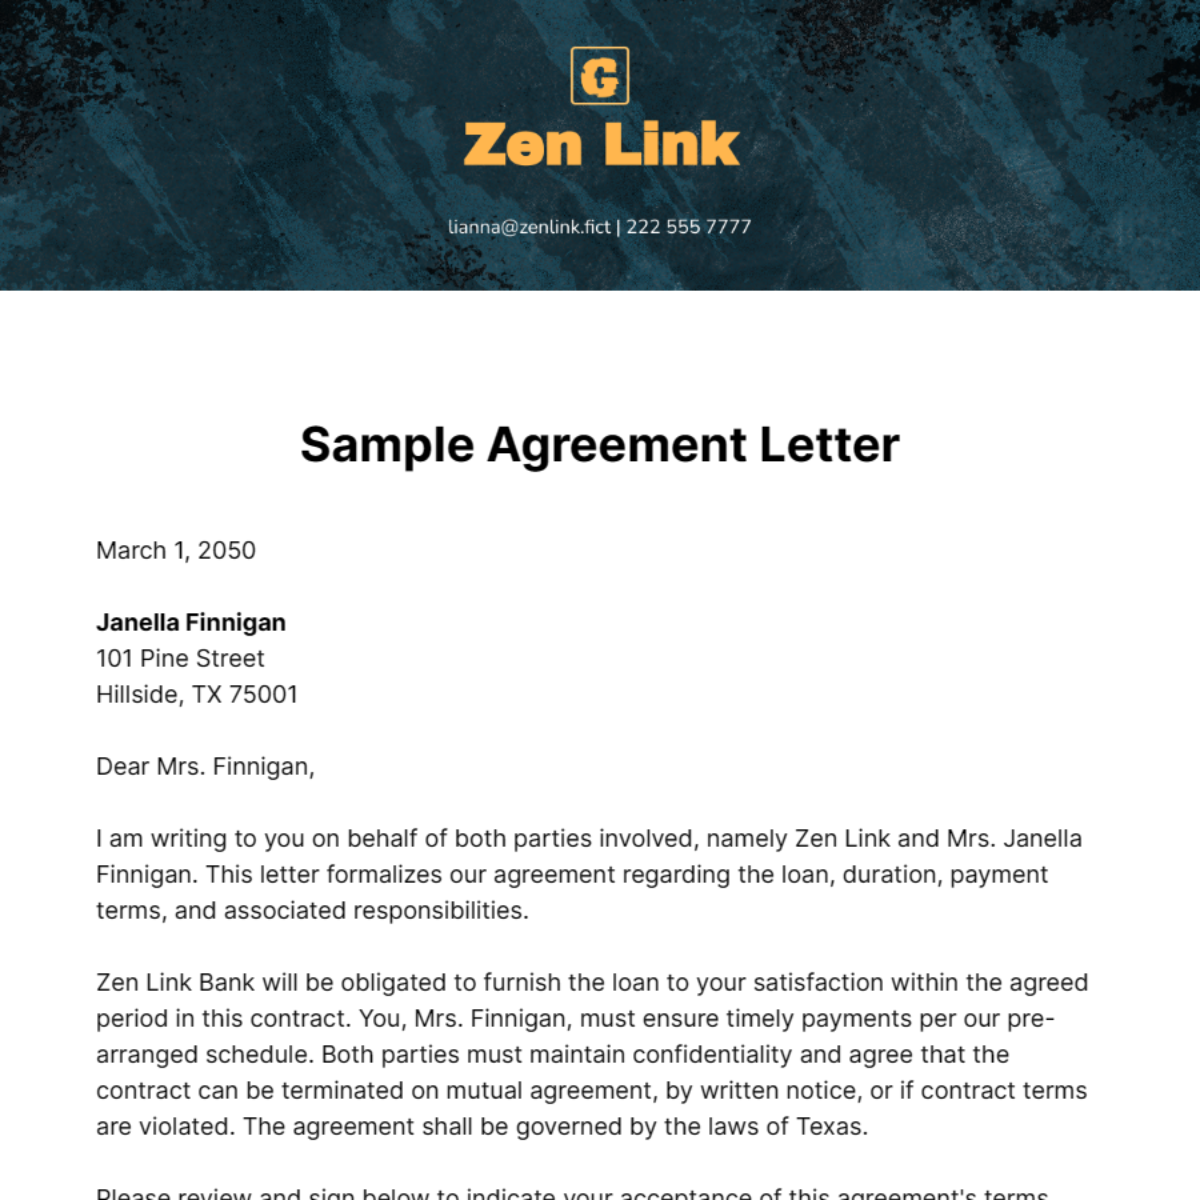 Free Sample Agreement Letter Template